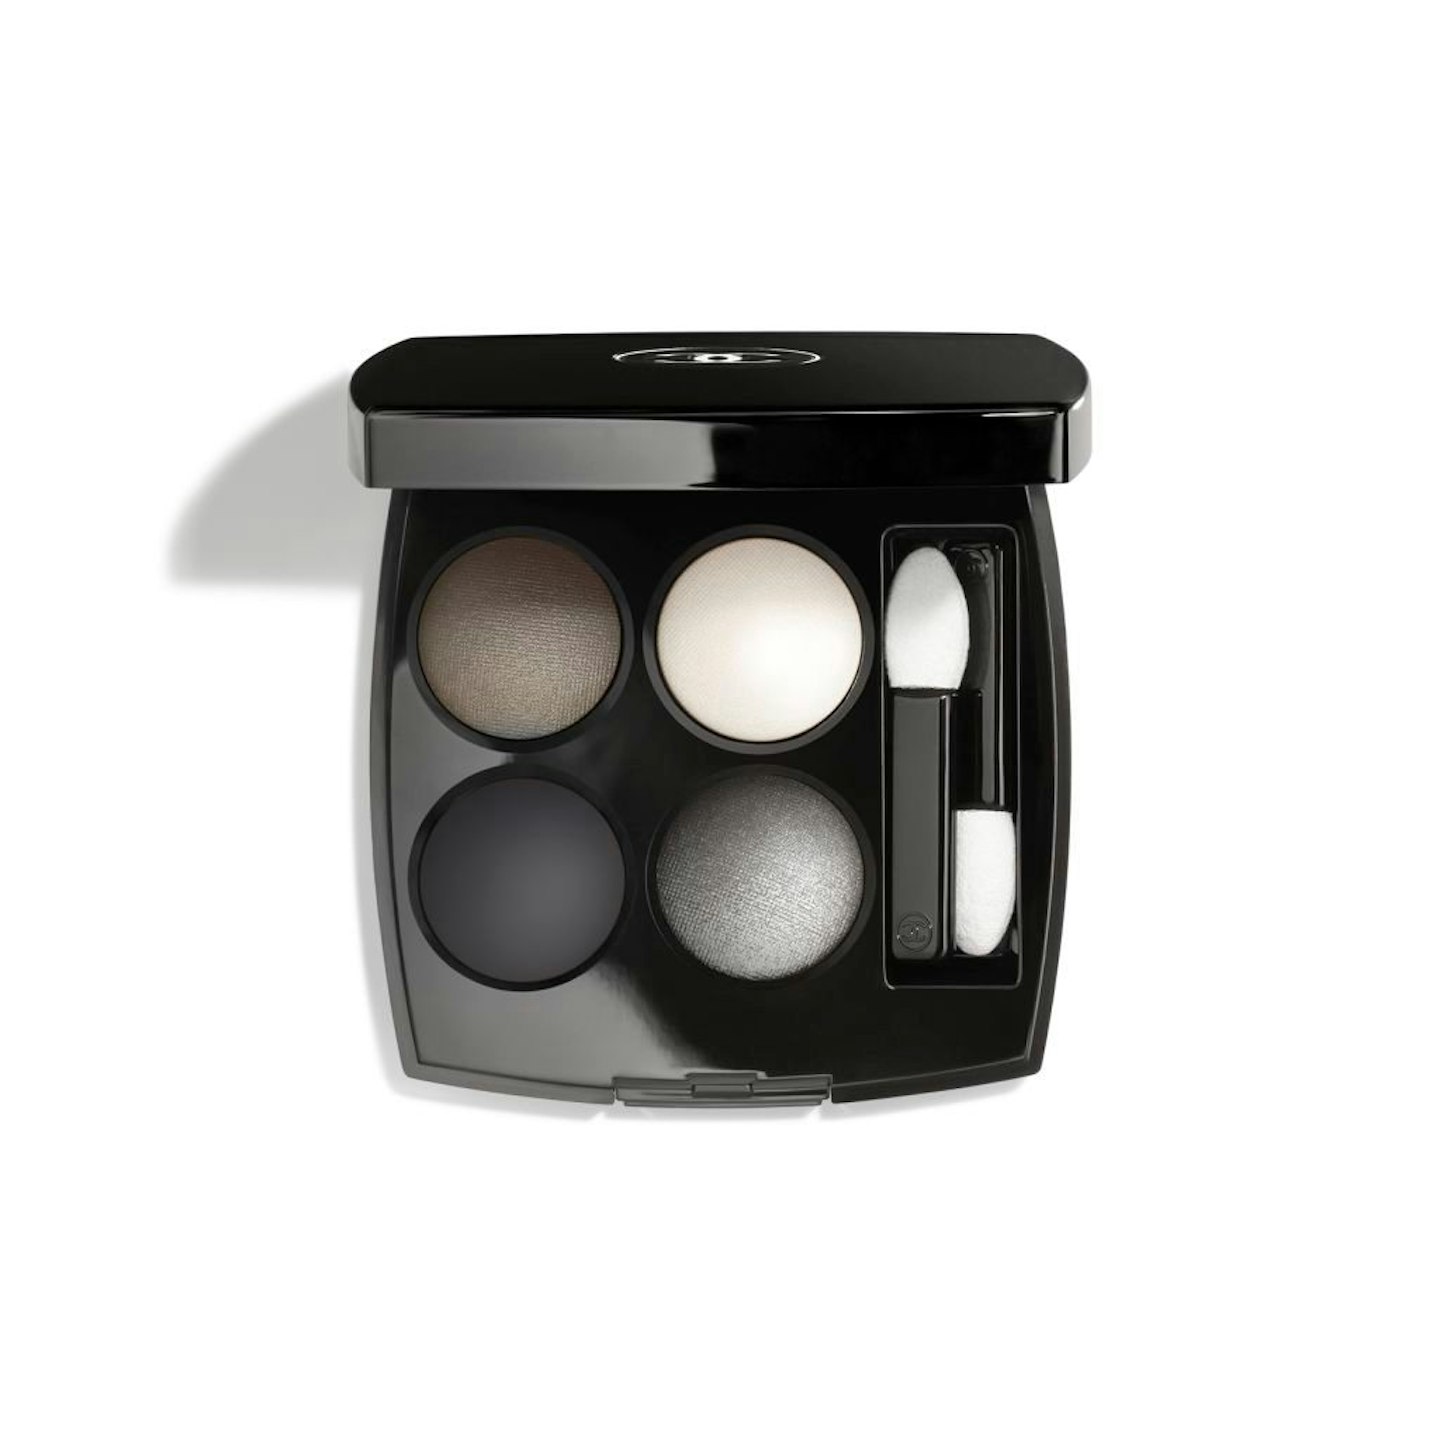 Les 4 Ombres Multi-Effect Quadra Eyeshadow in Modern Glamour, £44